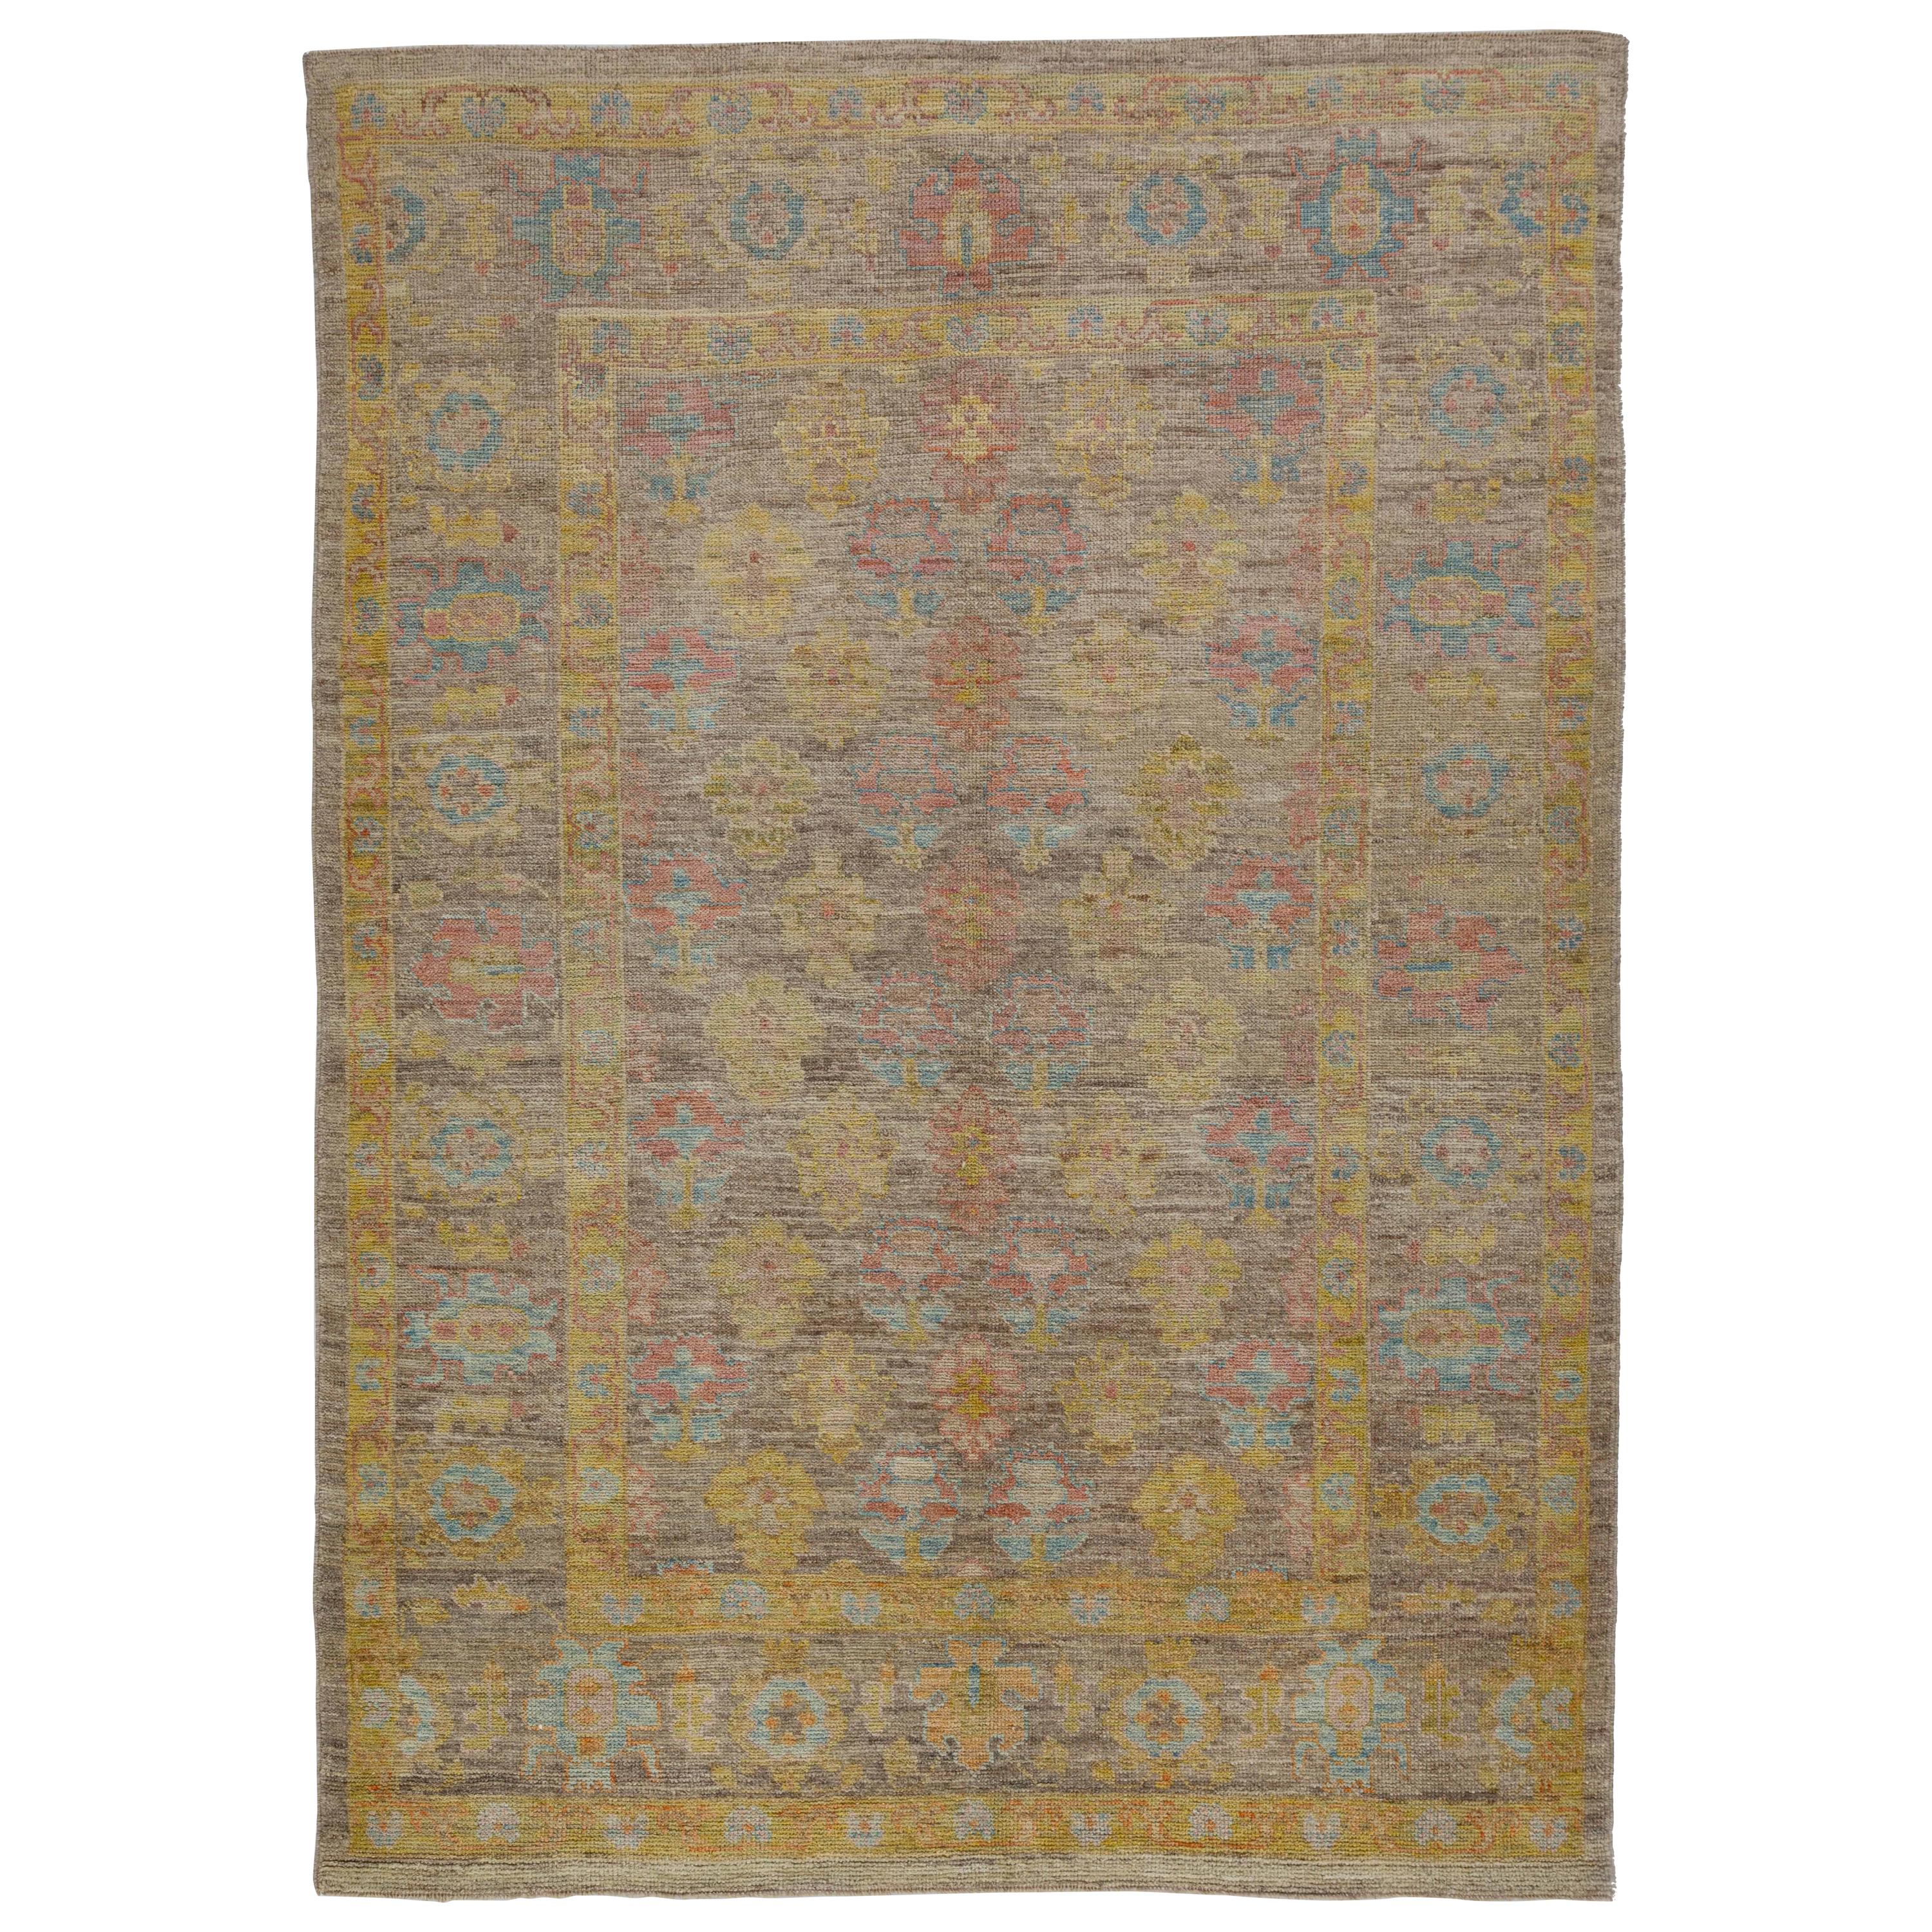 Modern Turkish Rug Oushak Weave with Blue and Pink Allover Floral Design